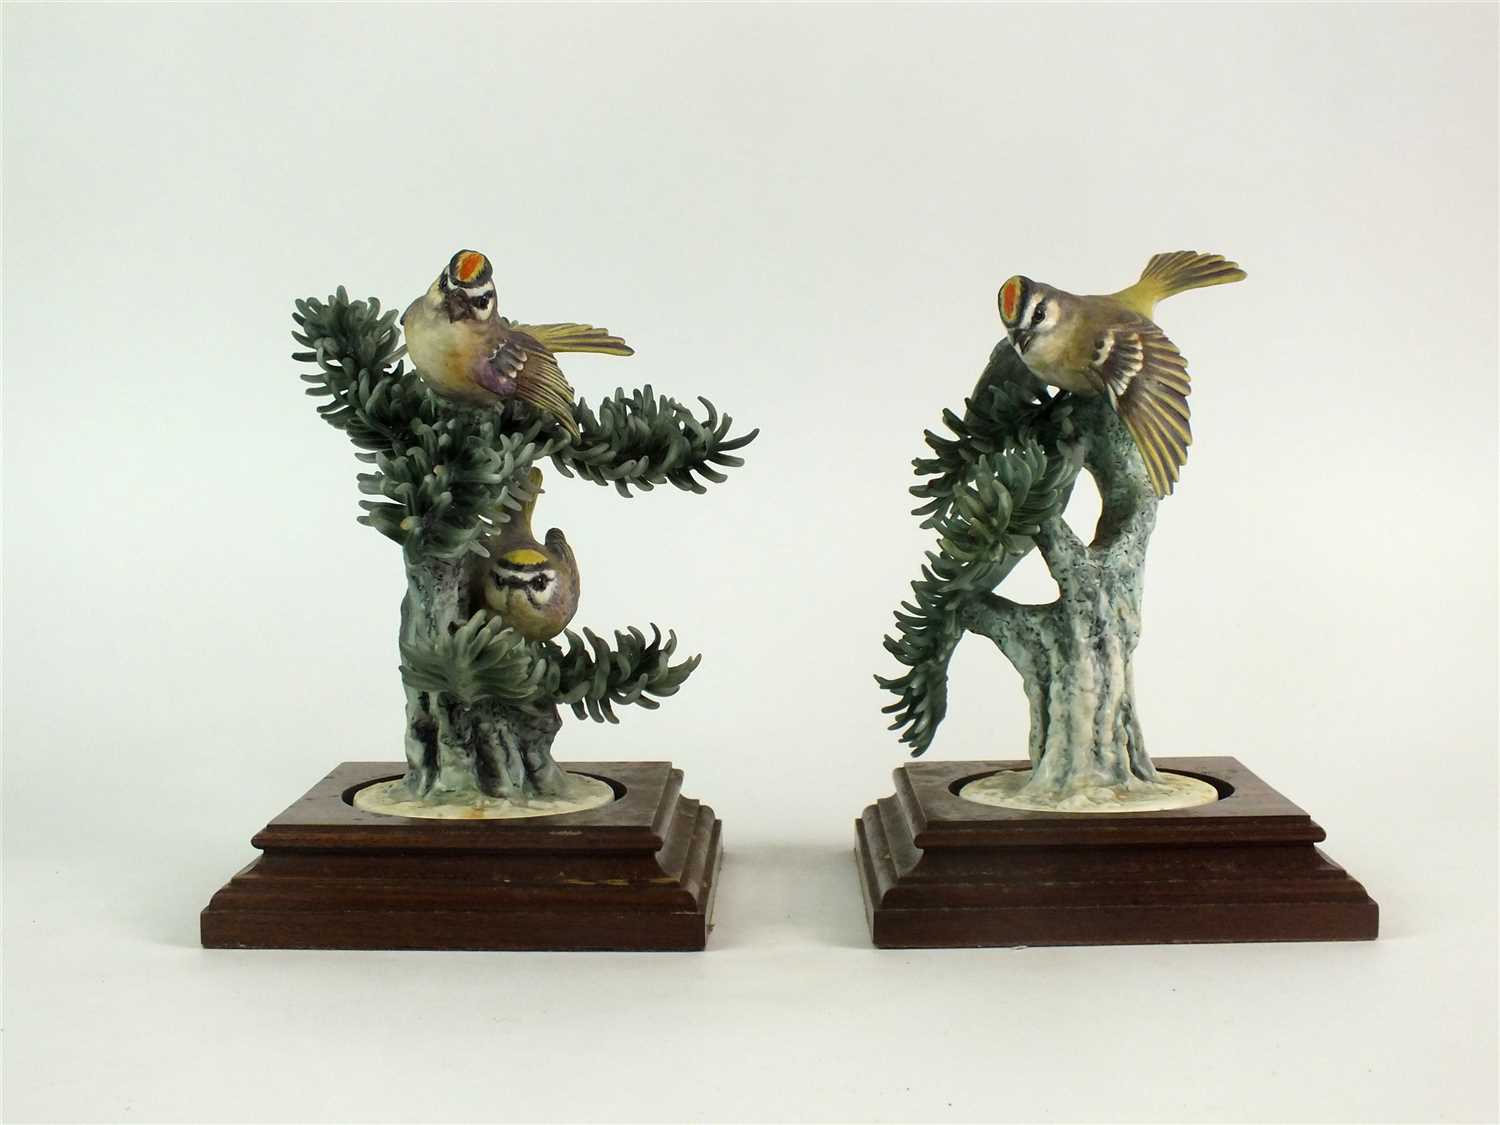 Lot 79 - A pair of Royal Worcester models of Kinglets